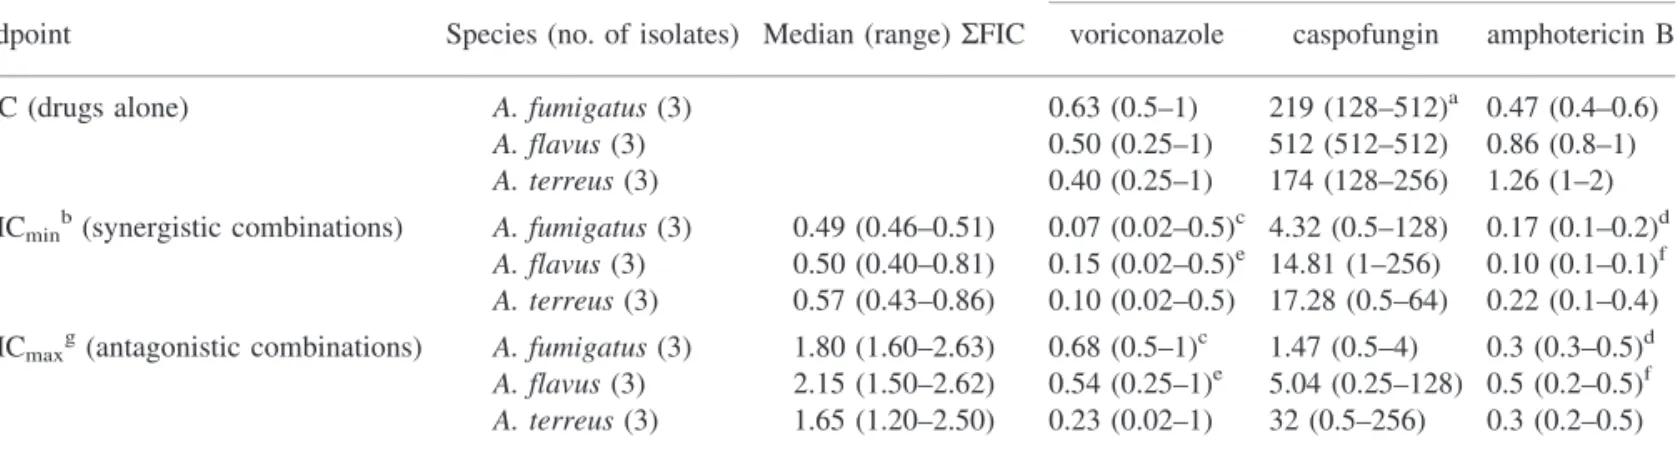 Table 1 summarizes the results of the FIC index analysis for the triple combination of voriconazole, caspofungin and  ampho-tericin B tested against A